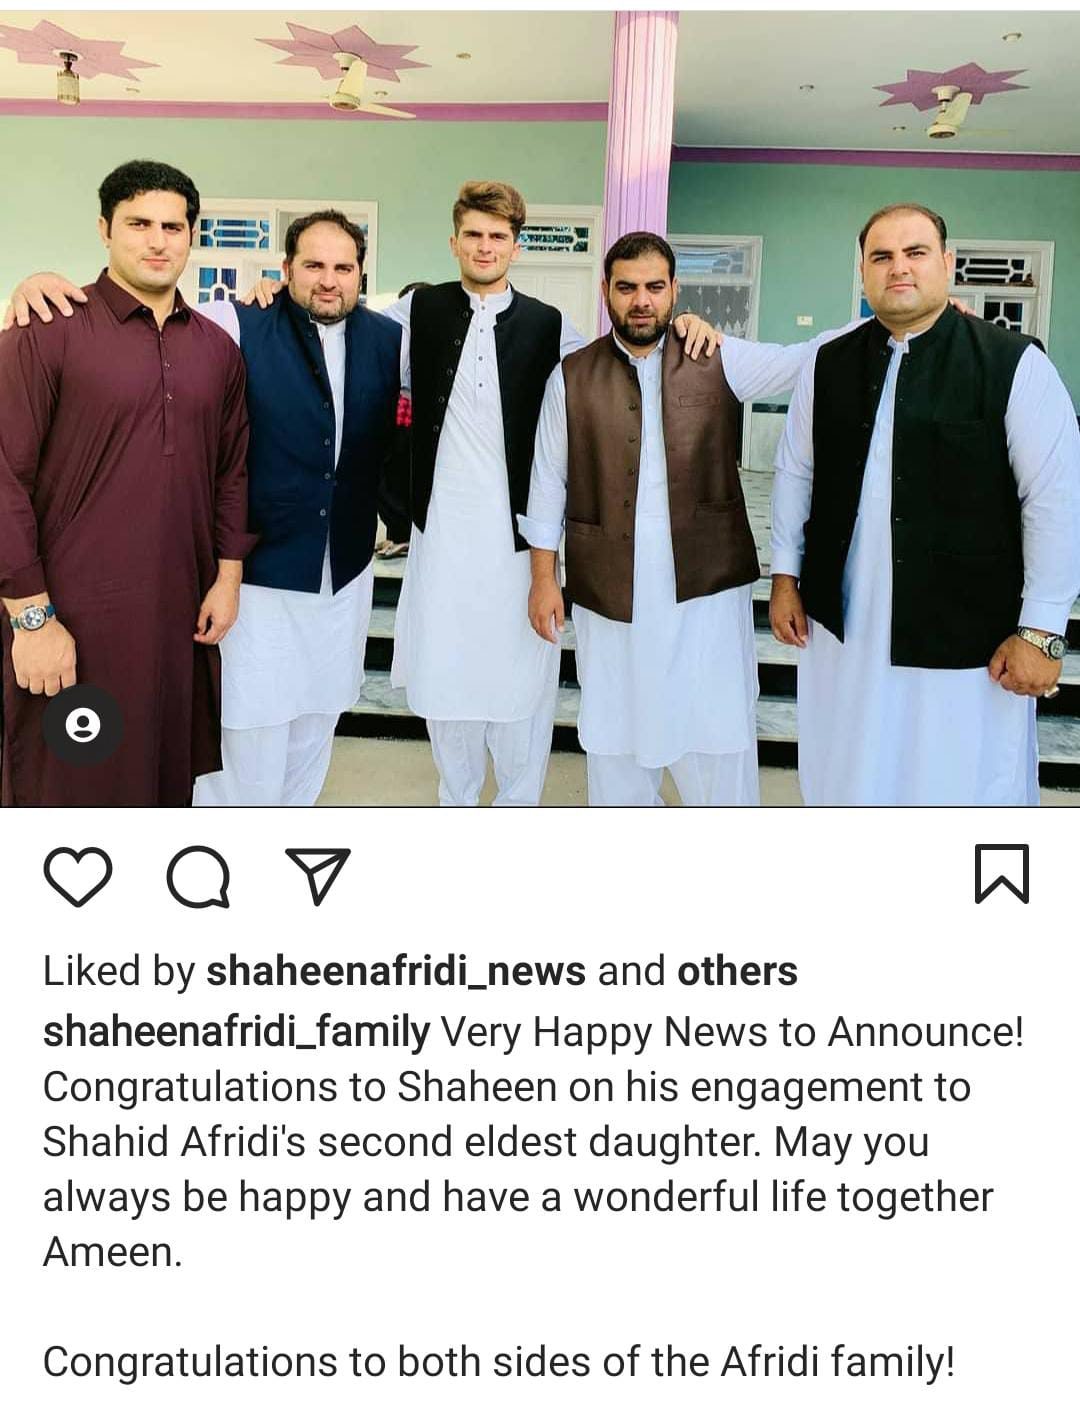 Shaheen Afridi Marriage -Rumours Spread as Pakistan’s Pace Bowler to Tie Knot with the Second Eldest Daughter of Shahid Afridi